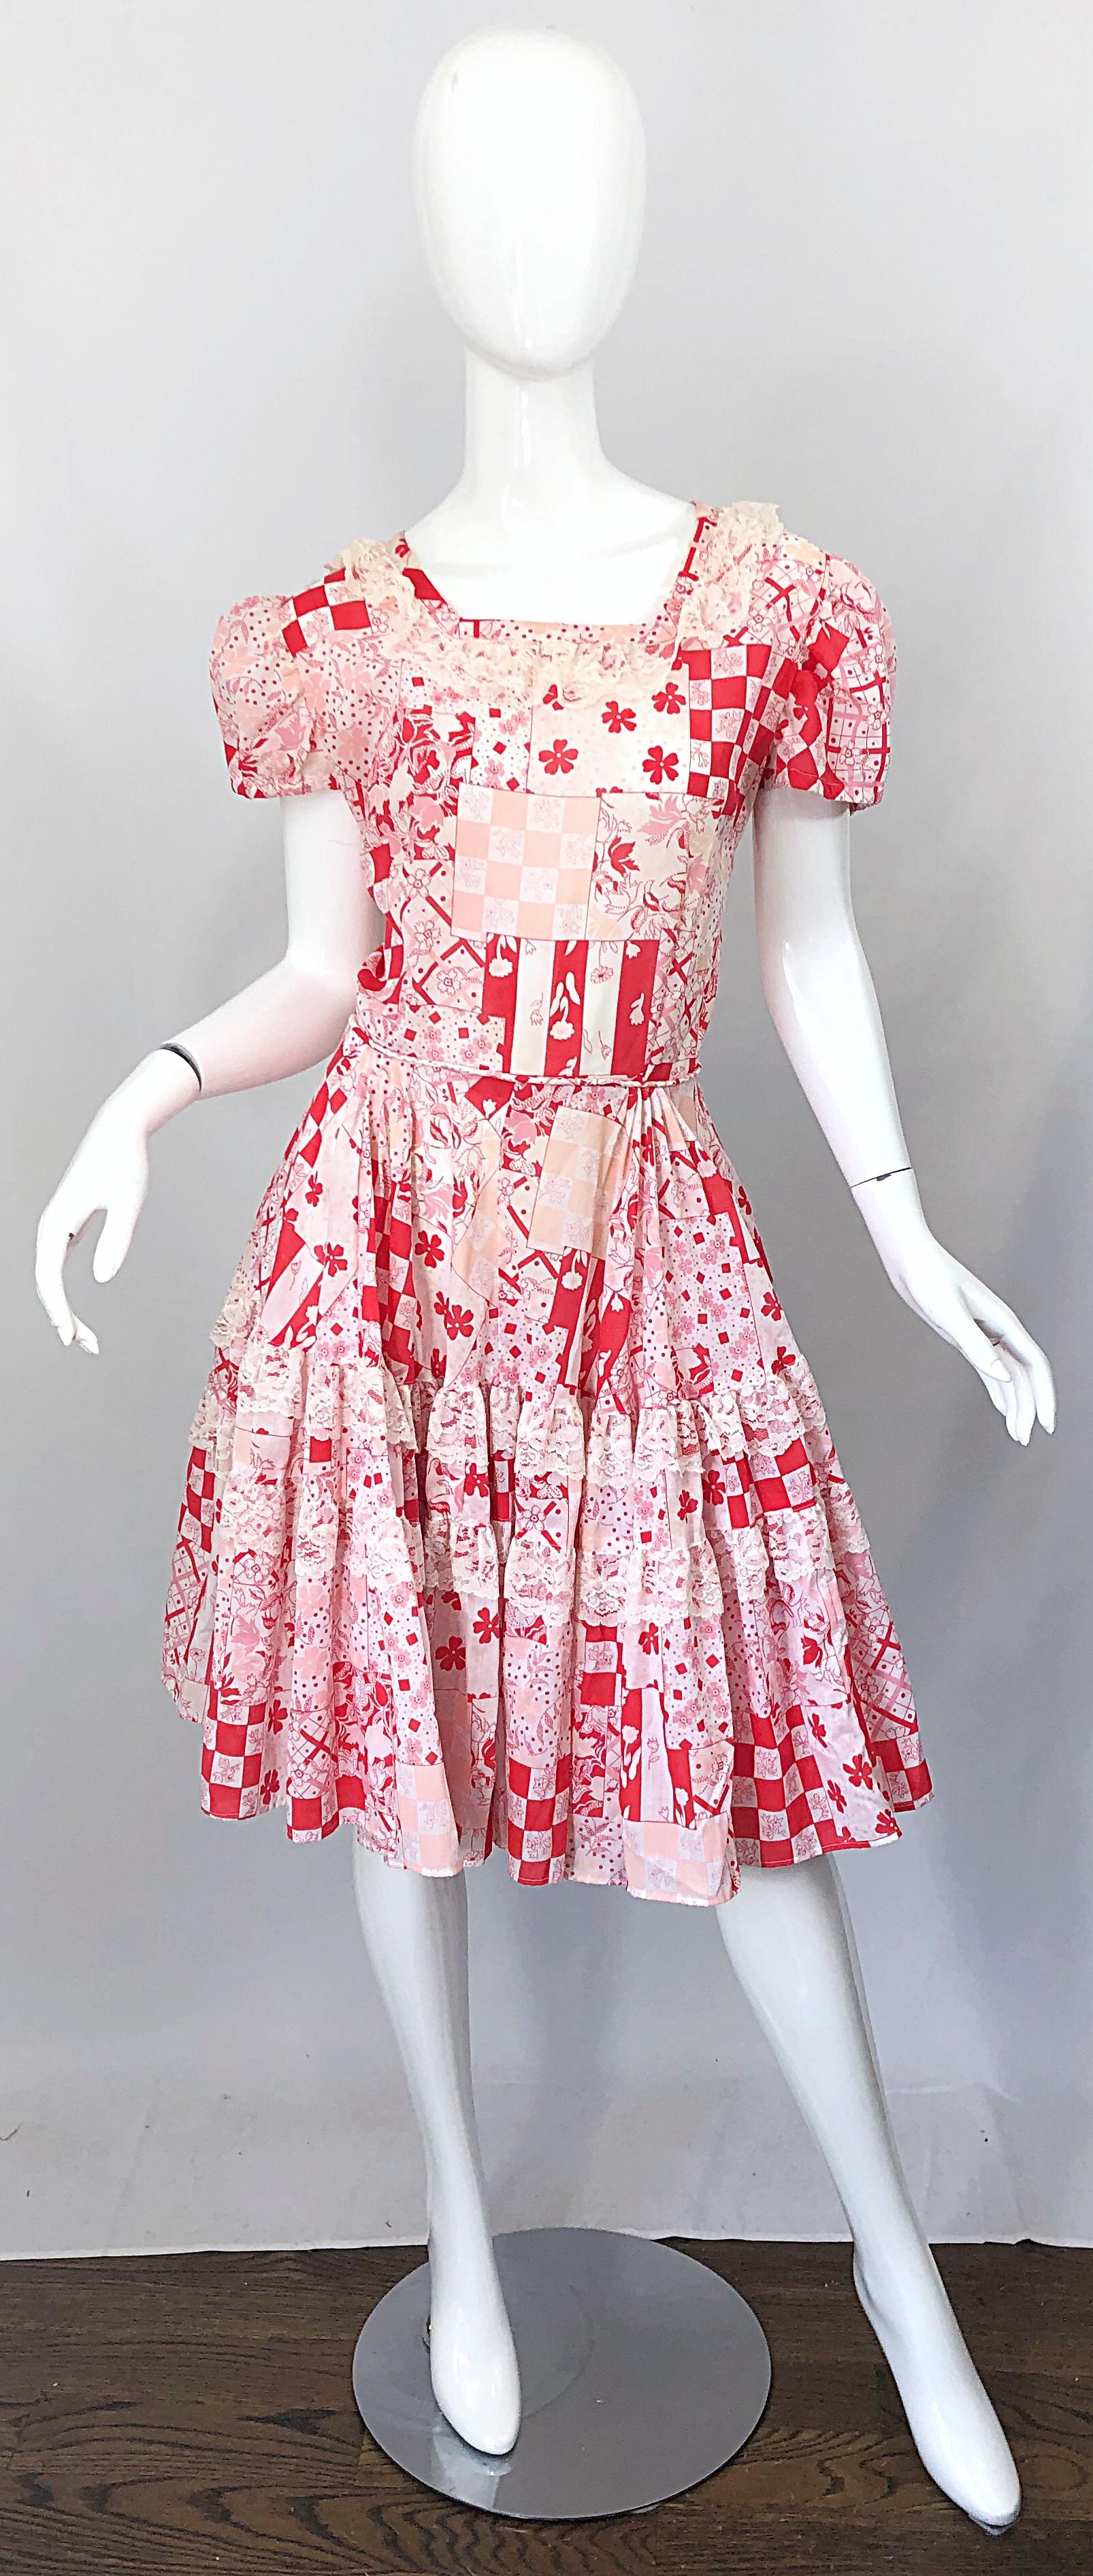 Chic 1970s novelty print red and white puff sleeve dress! Features a soft cotton fabric with ivory lace around the collar. Cute puff sleeves on a fitted bodice. Full forgiving and flattering skirt also features ivory lace hand-sewn throughout.